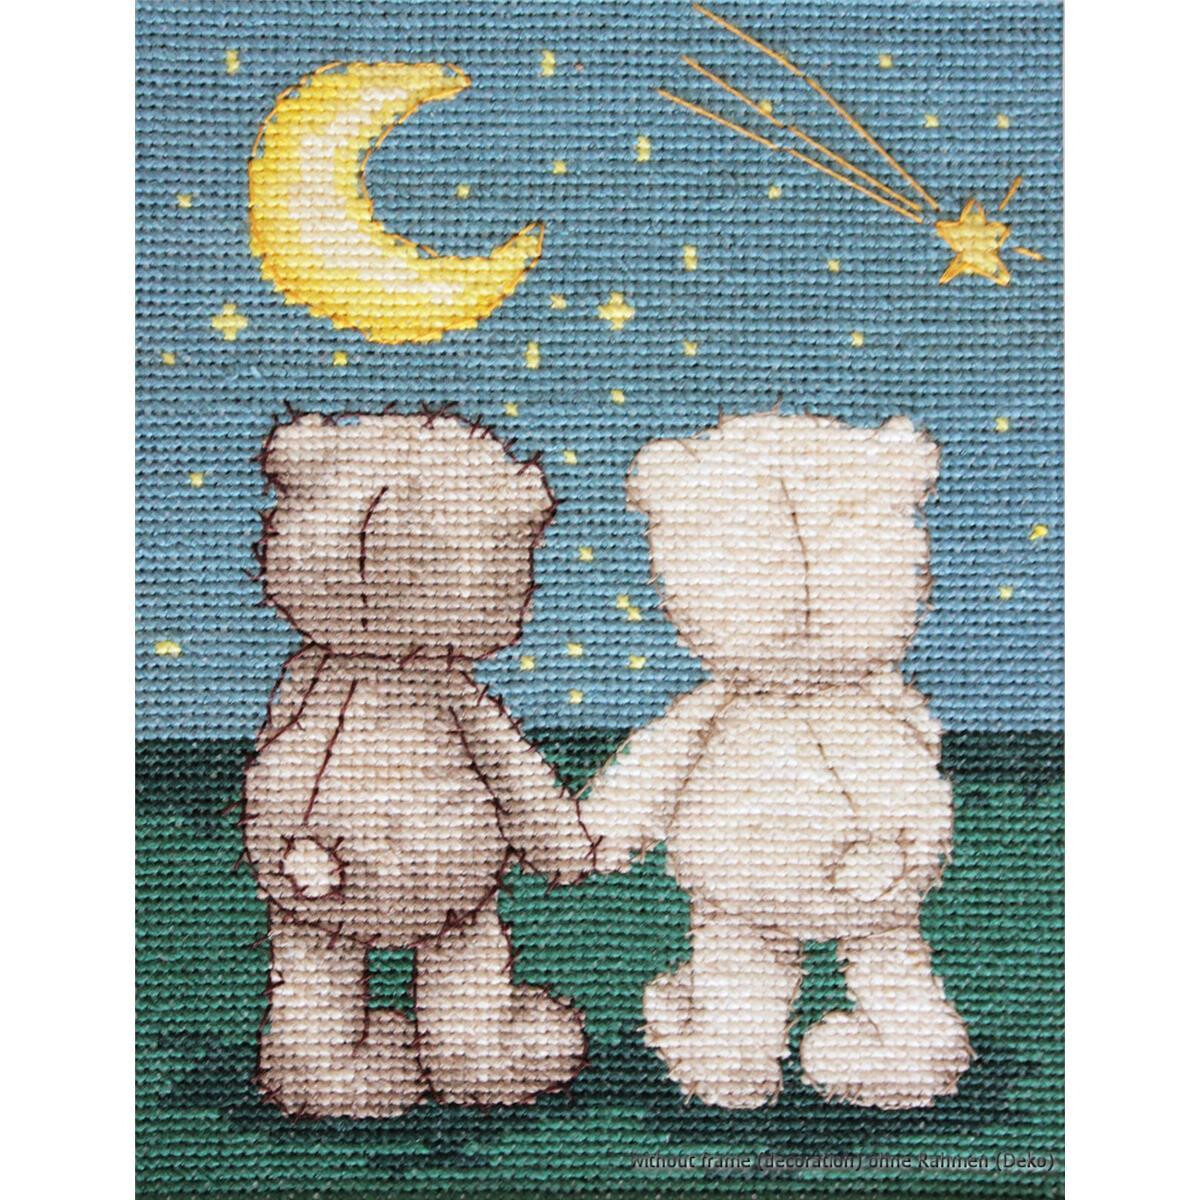 Luca-S counted Cross Stitch kit "Bruno and Bianca...